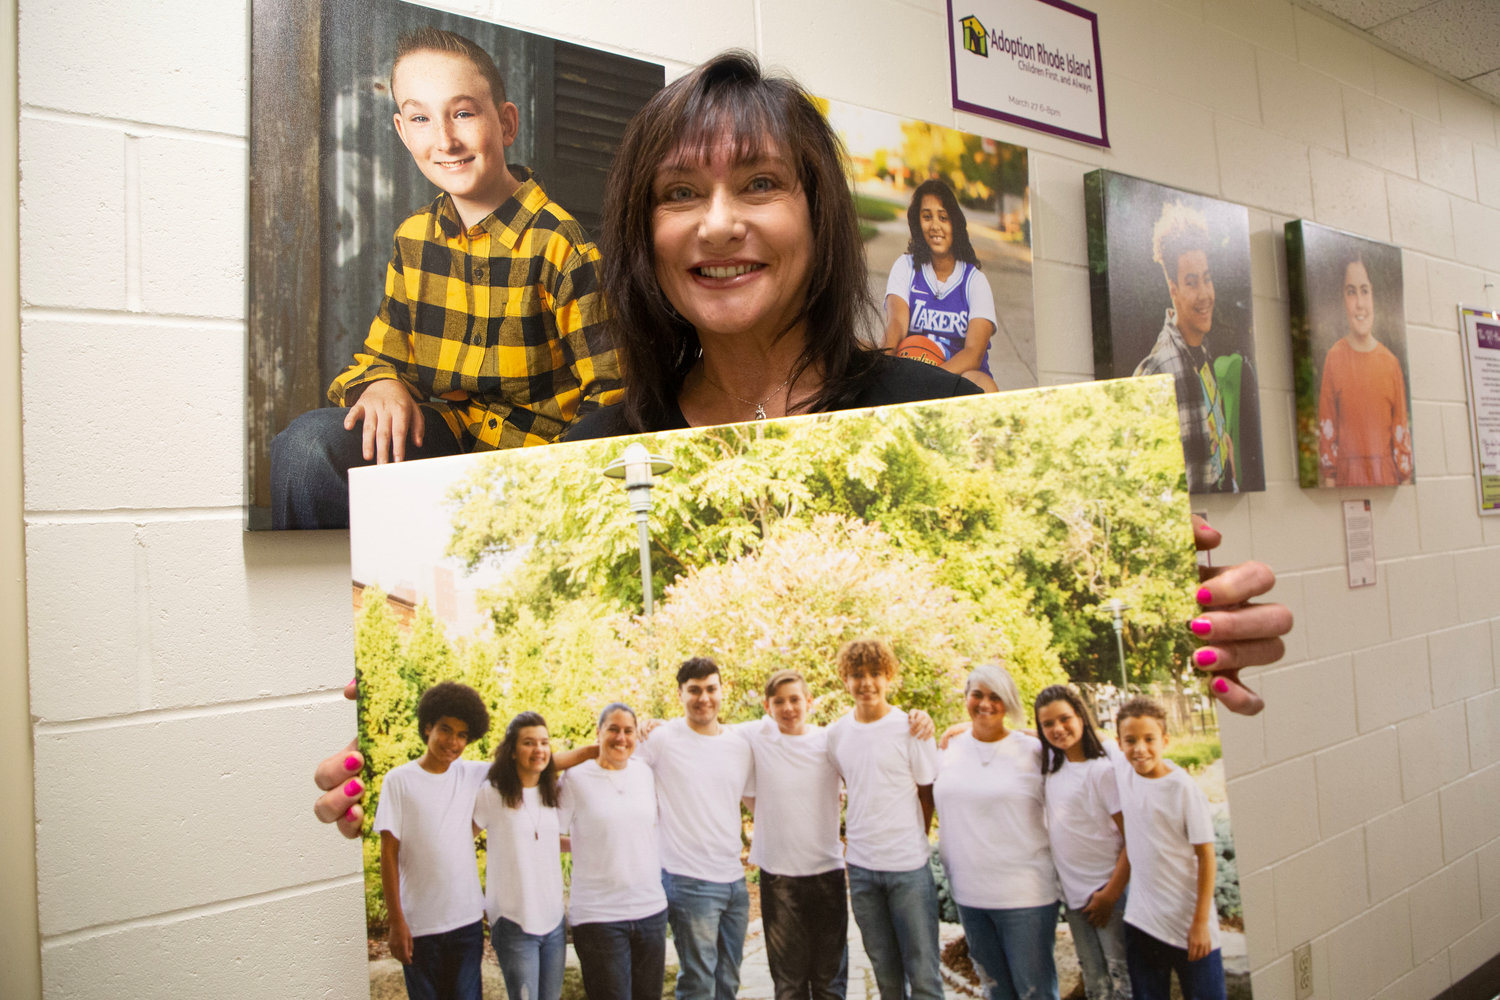 Donna Rivera, Marketing and Communications Director for Adoption Rhode Island, holding a photo of the Rado family, a local adoption success story whose family consists of three biological children and four adopted children.